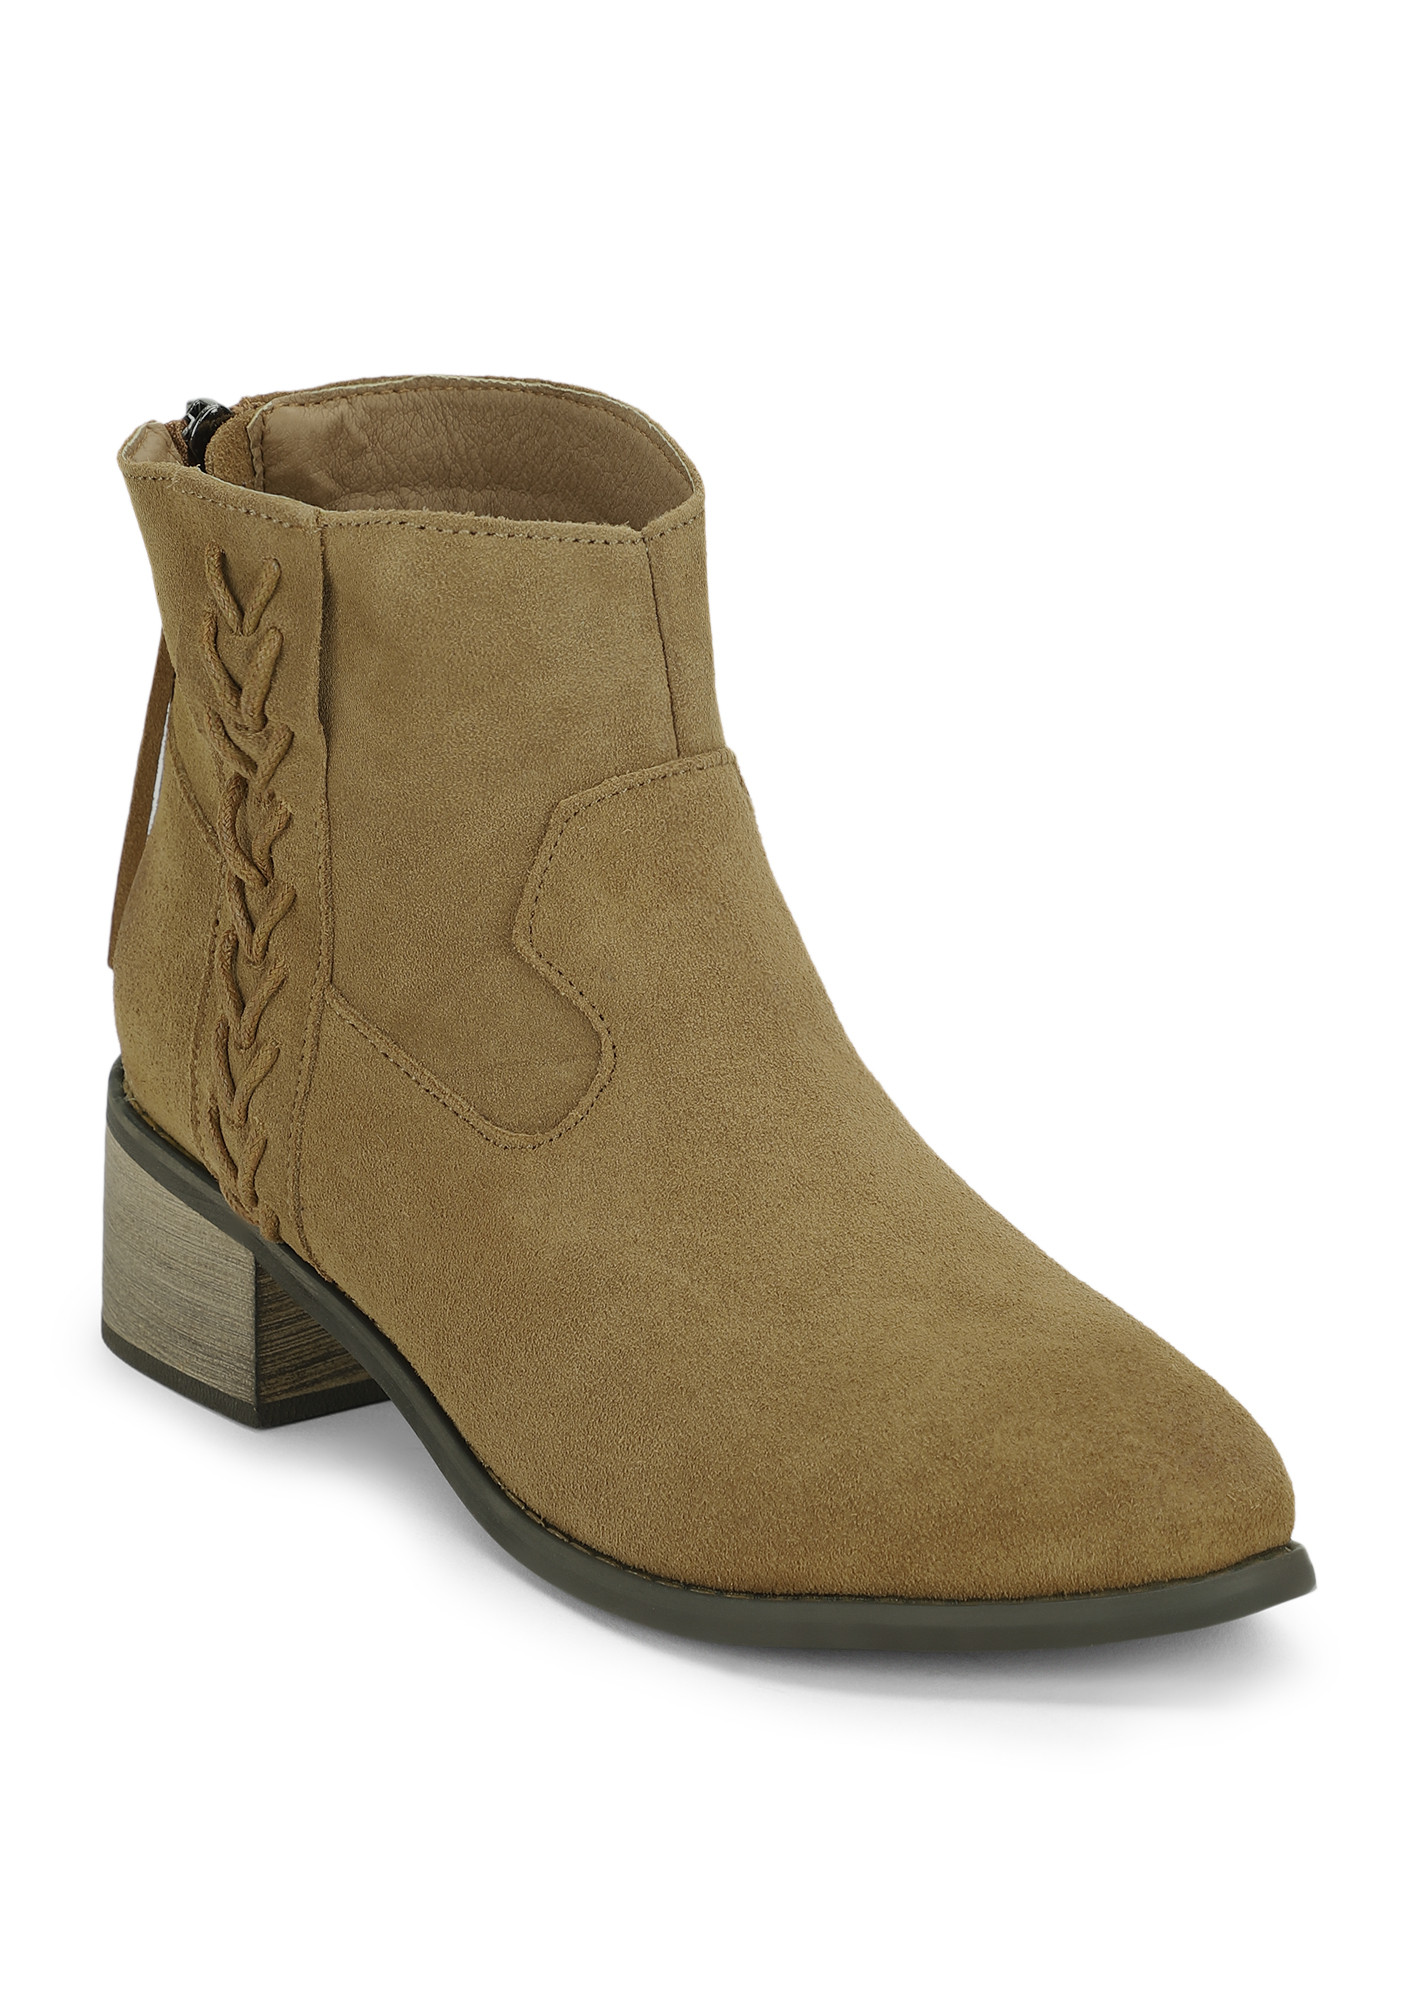 SAME OLD CLASSIC KHAKI ANKLE BOOTS